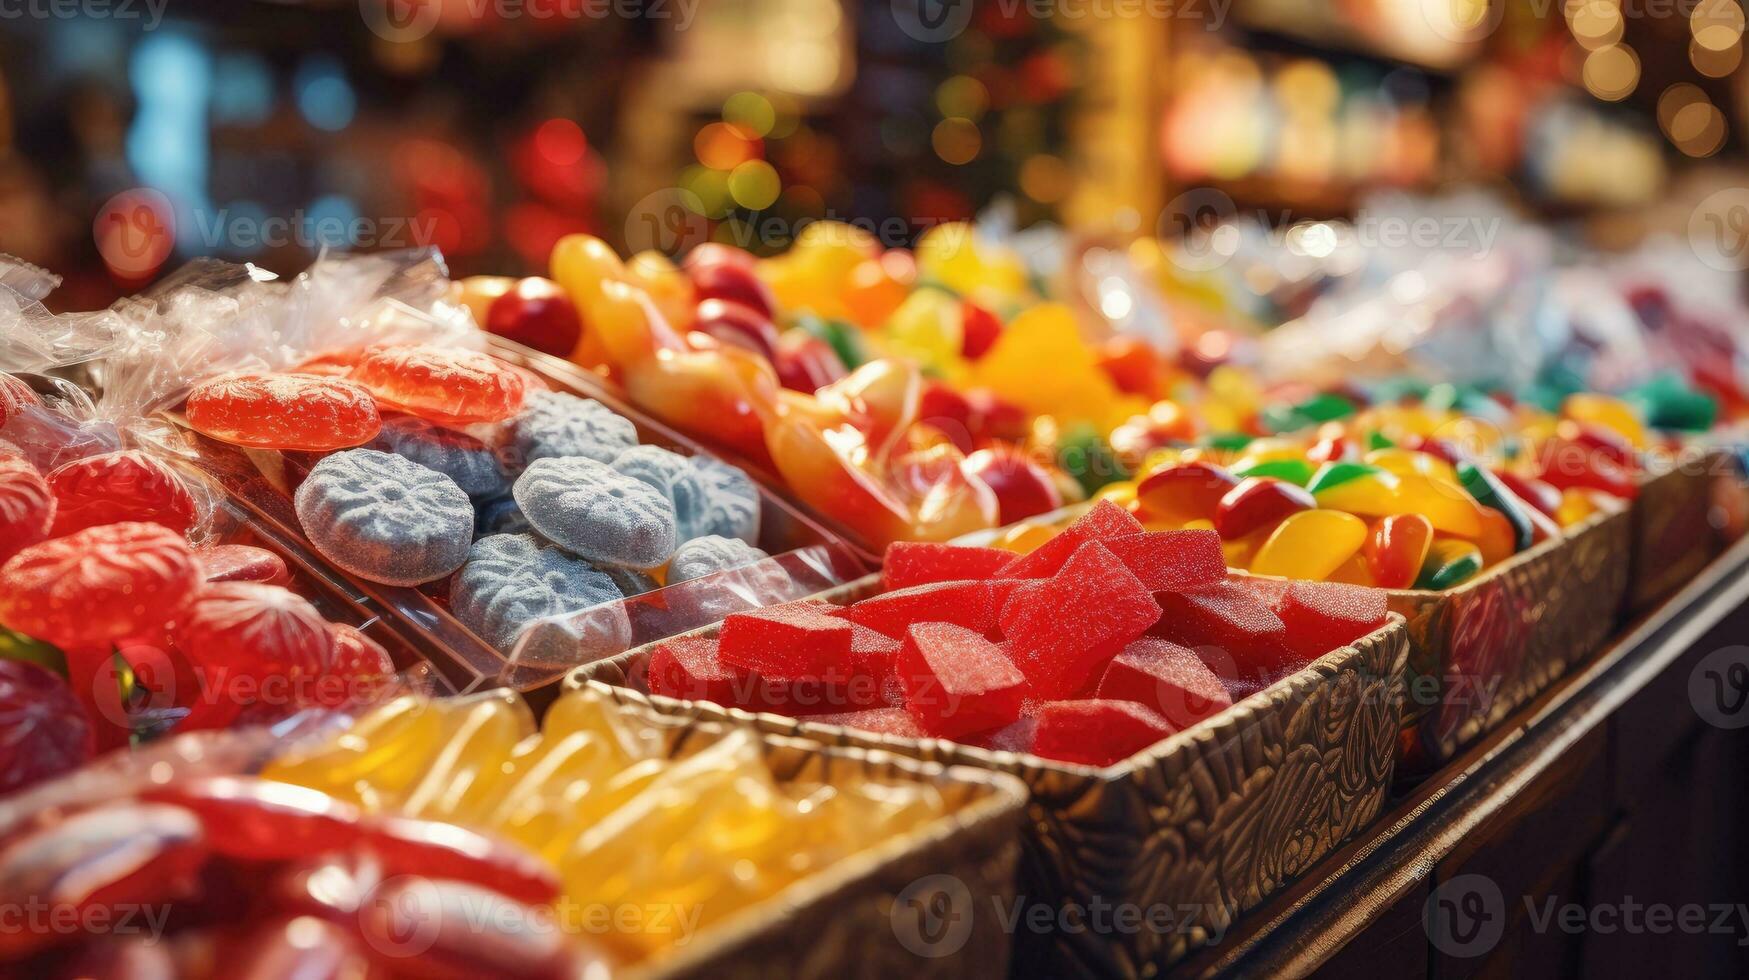 European Christmas markets, buying candy from market photo